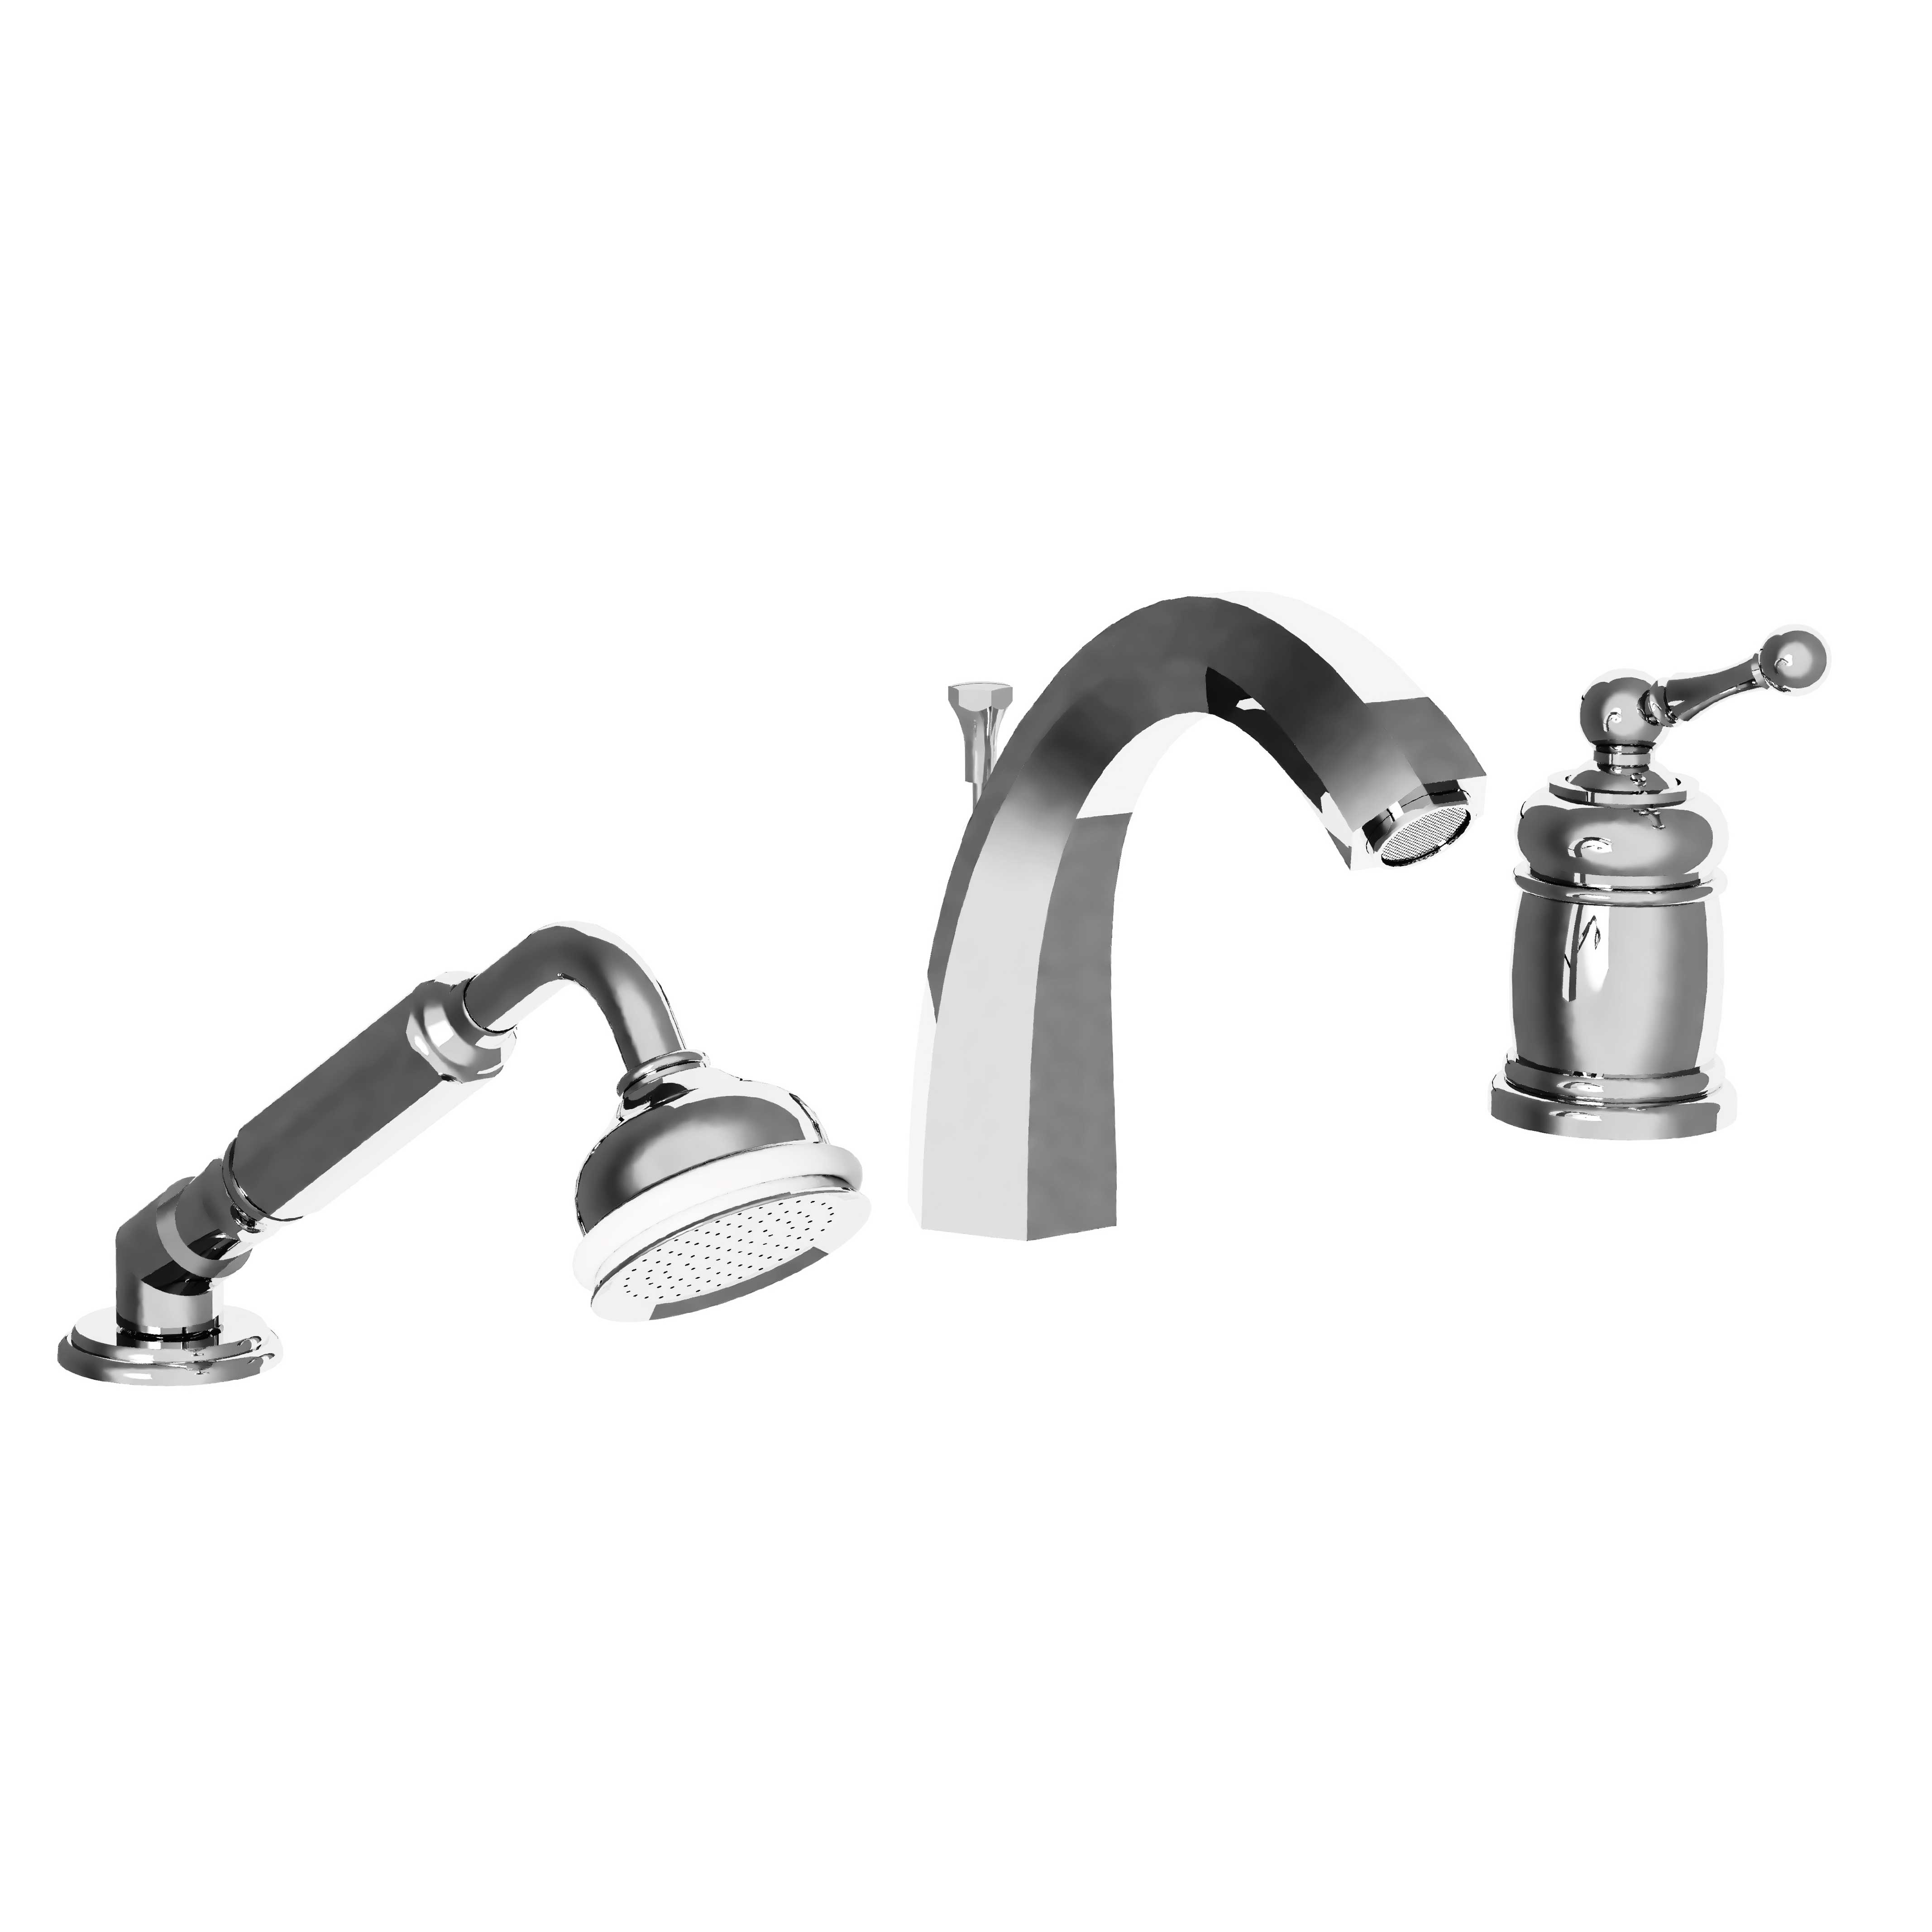 M30-3301MH 3-hole single-lever bath and shower mixer, high spout